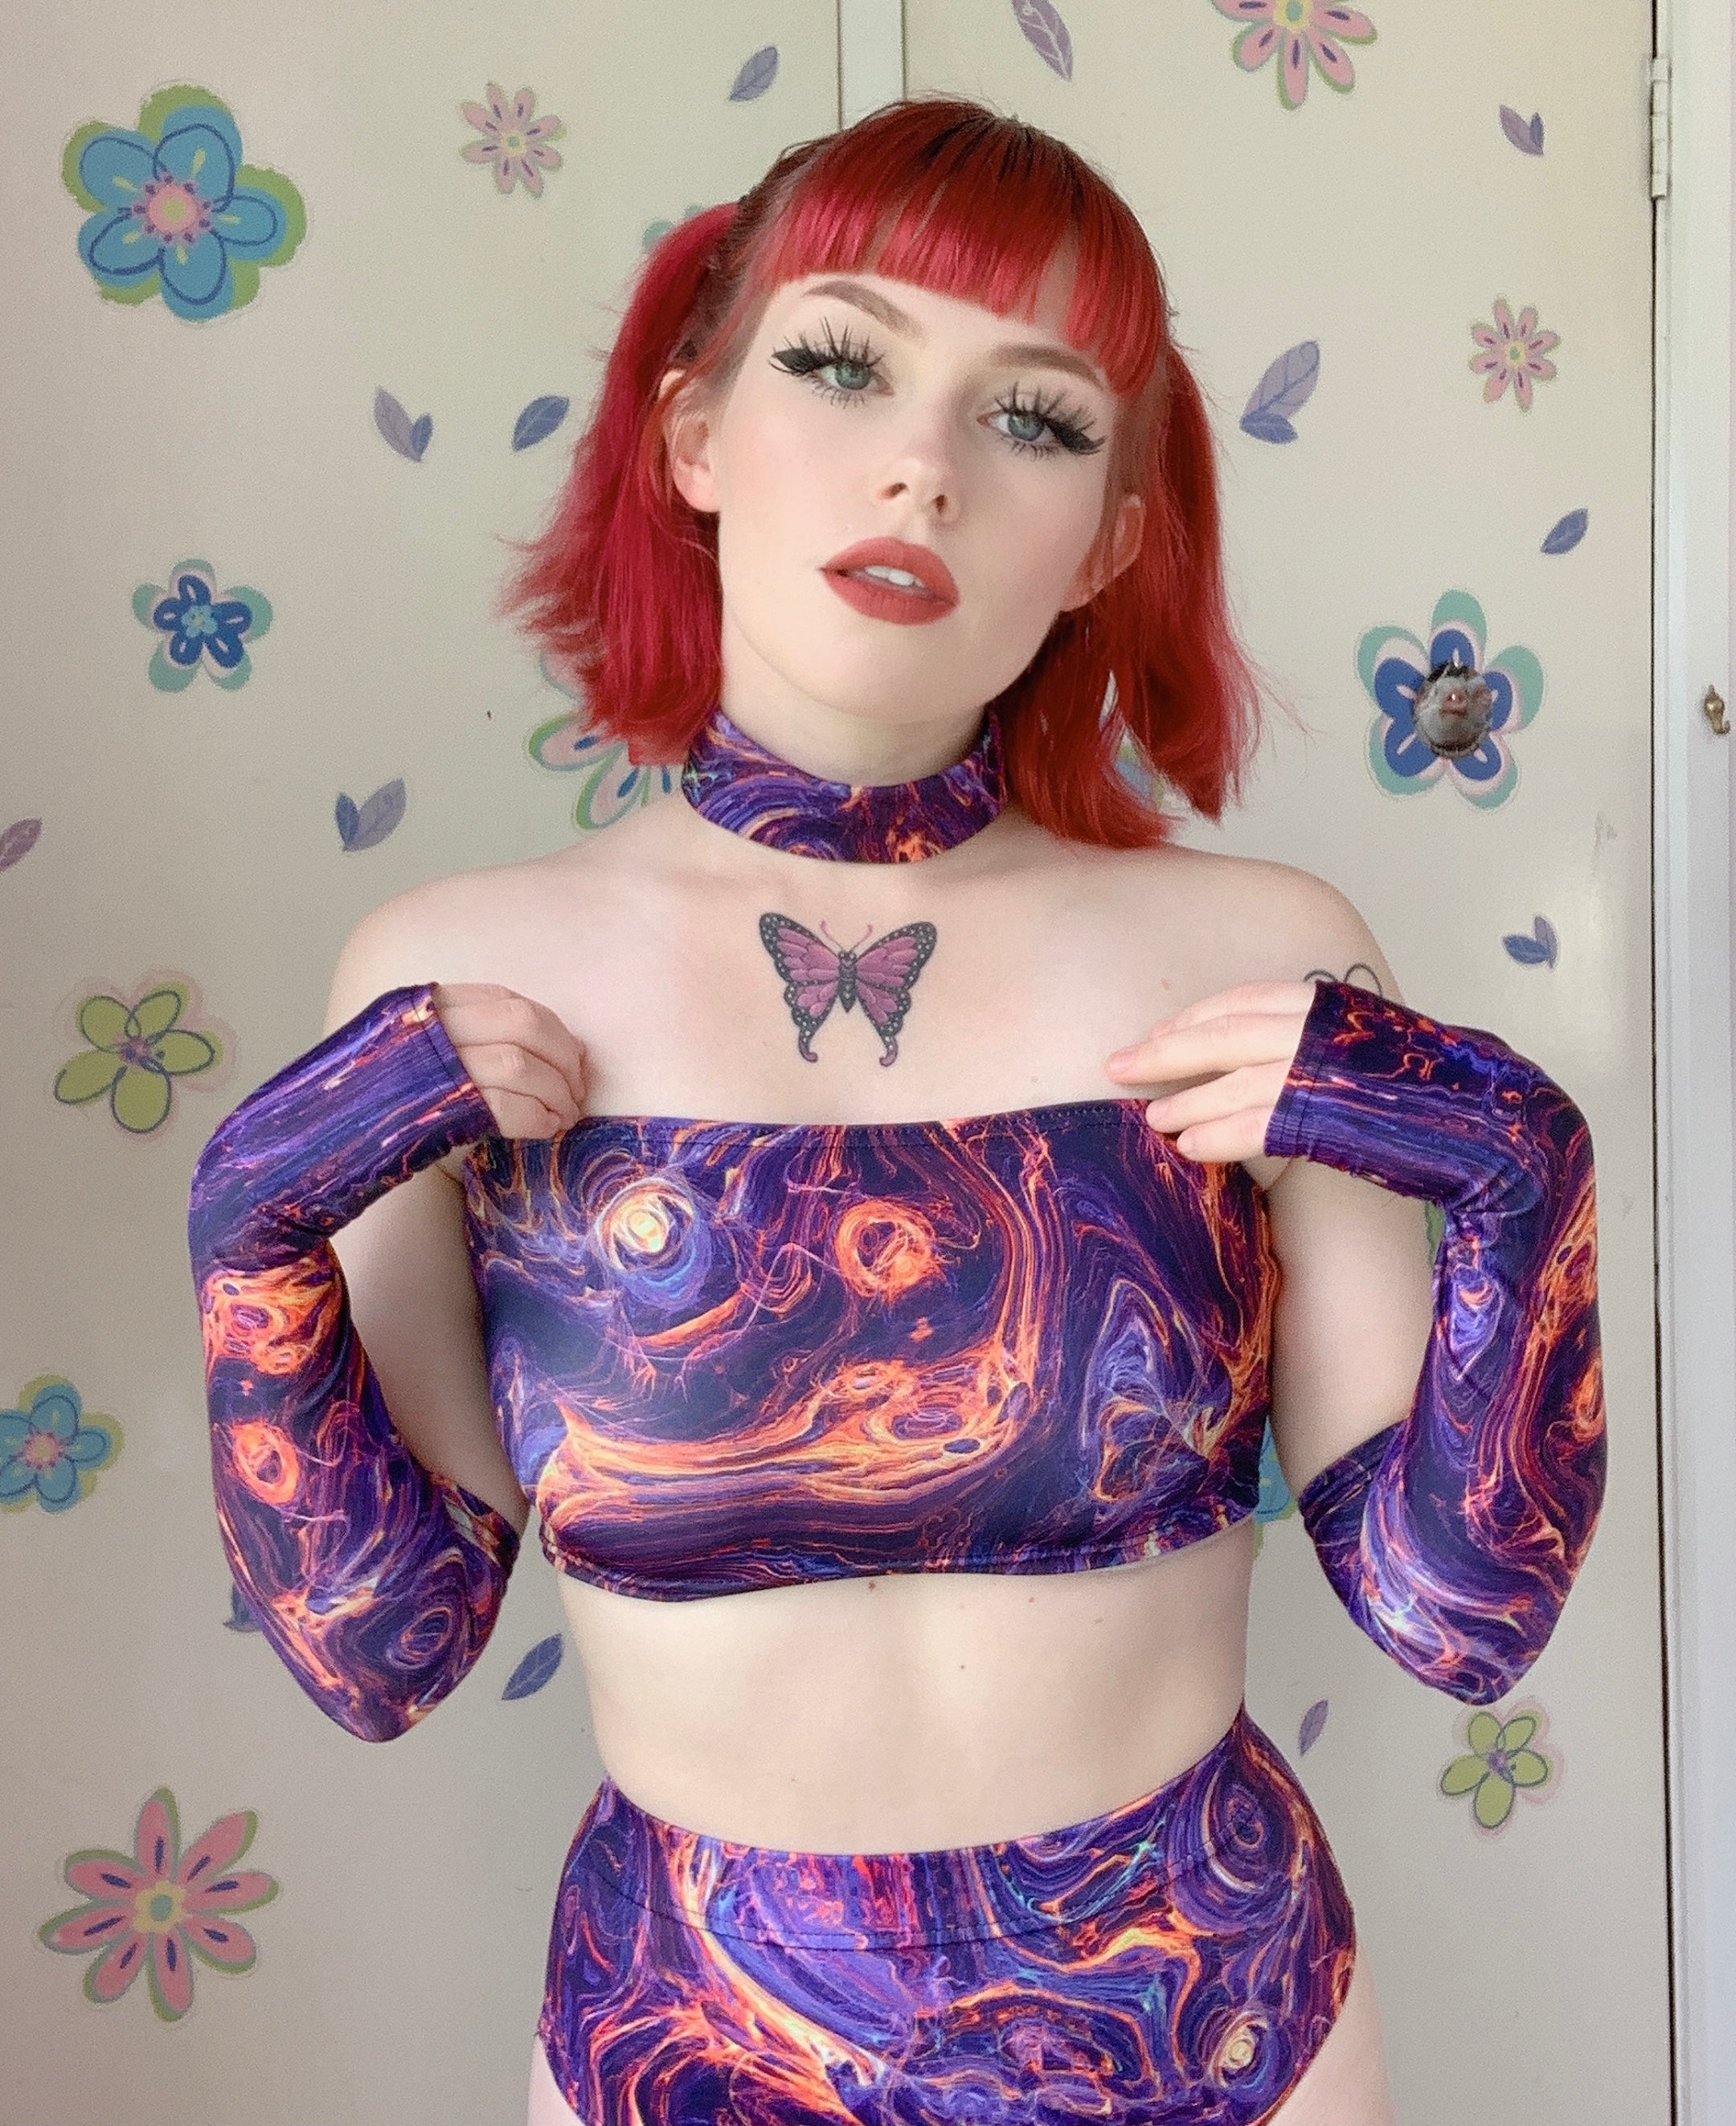 redhead girl with butterfly tattoo wearing rave outfit choker tube top with arm warmers